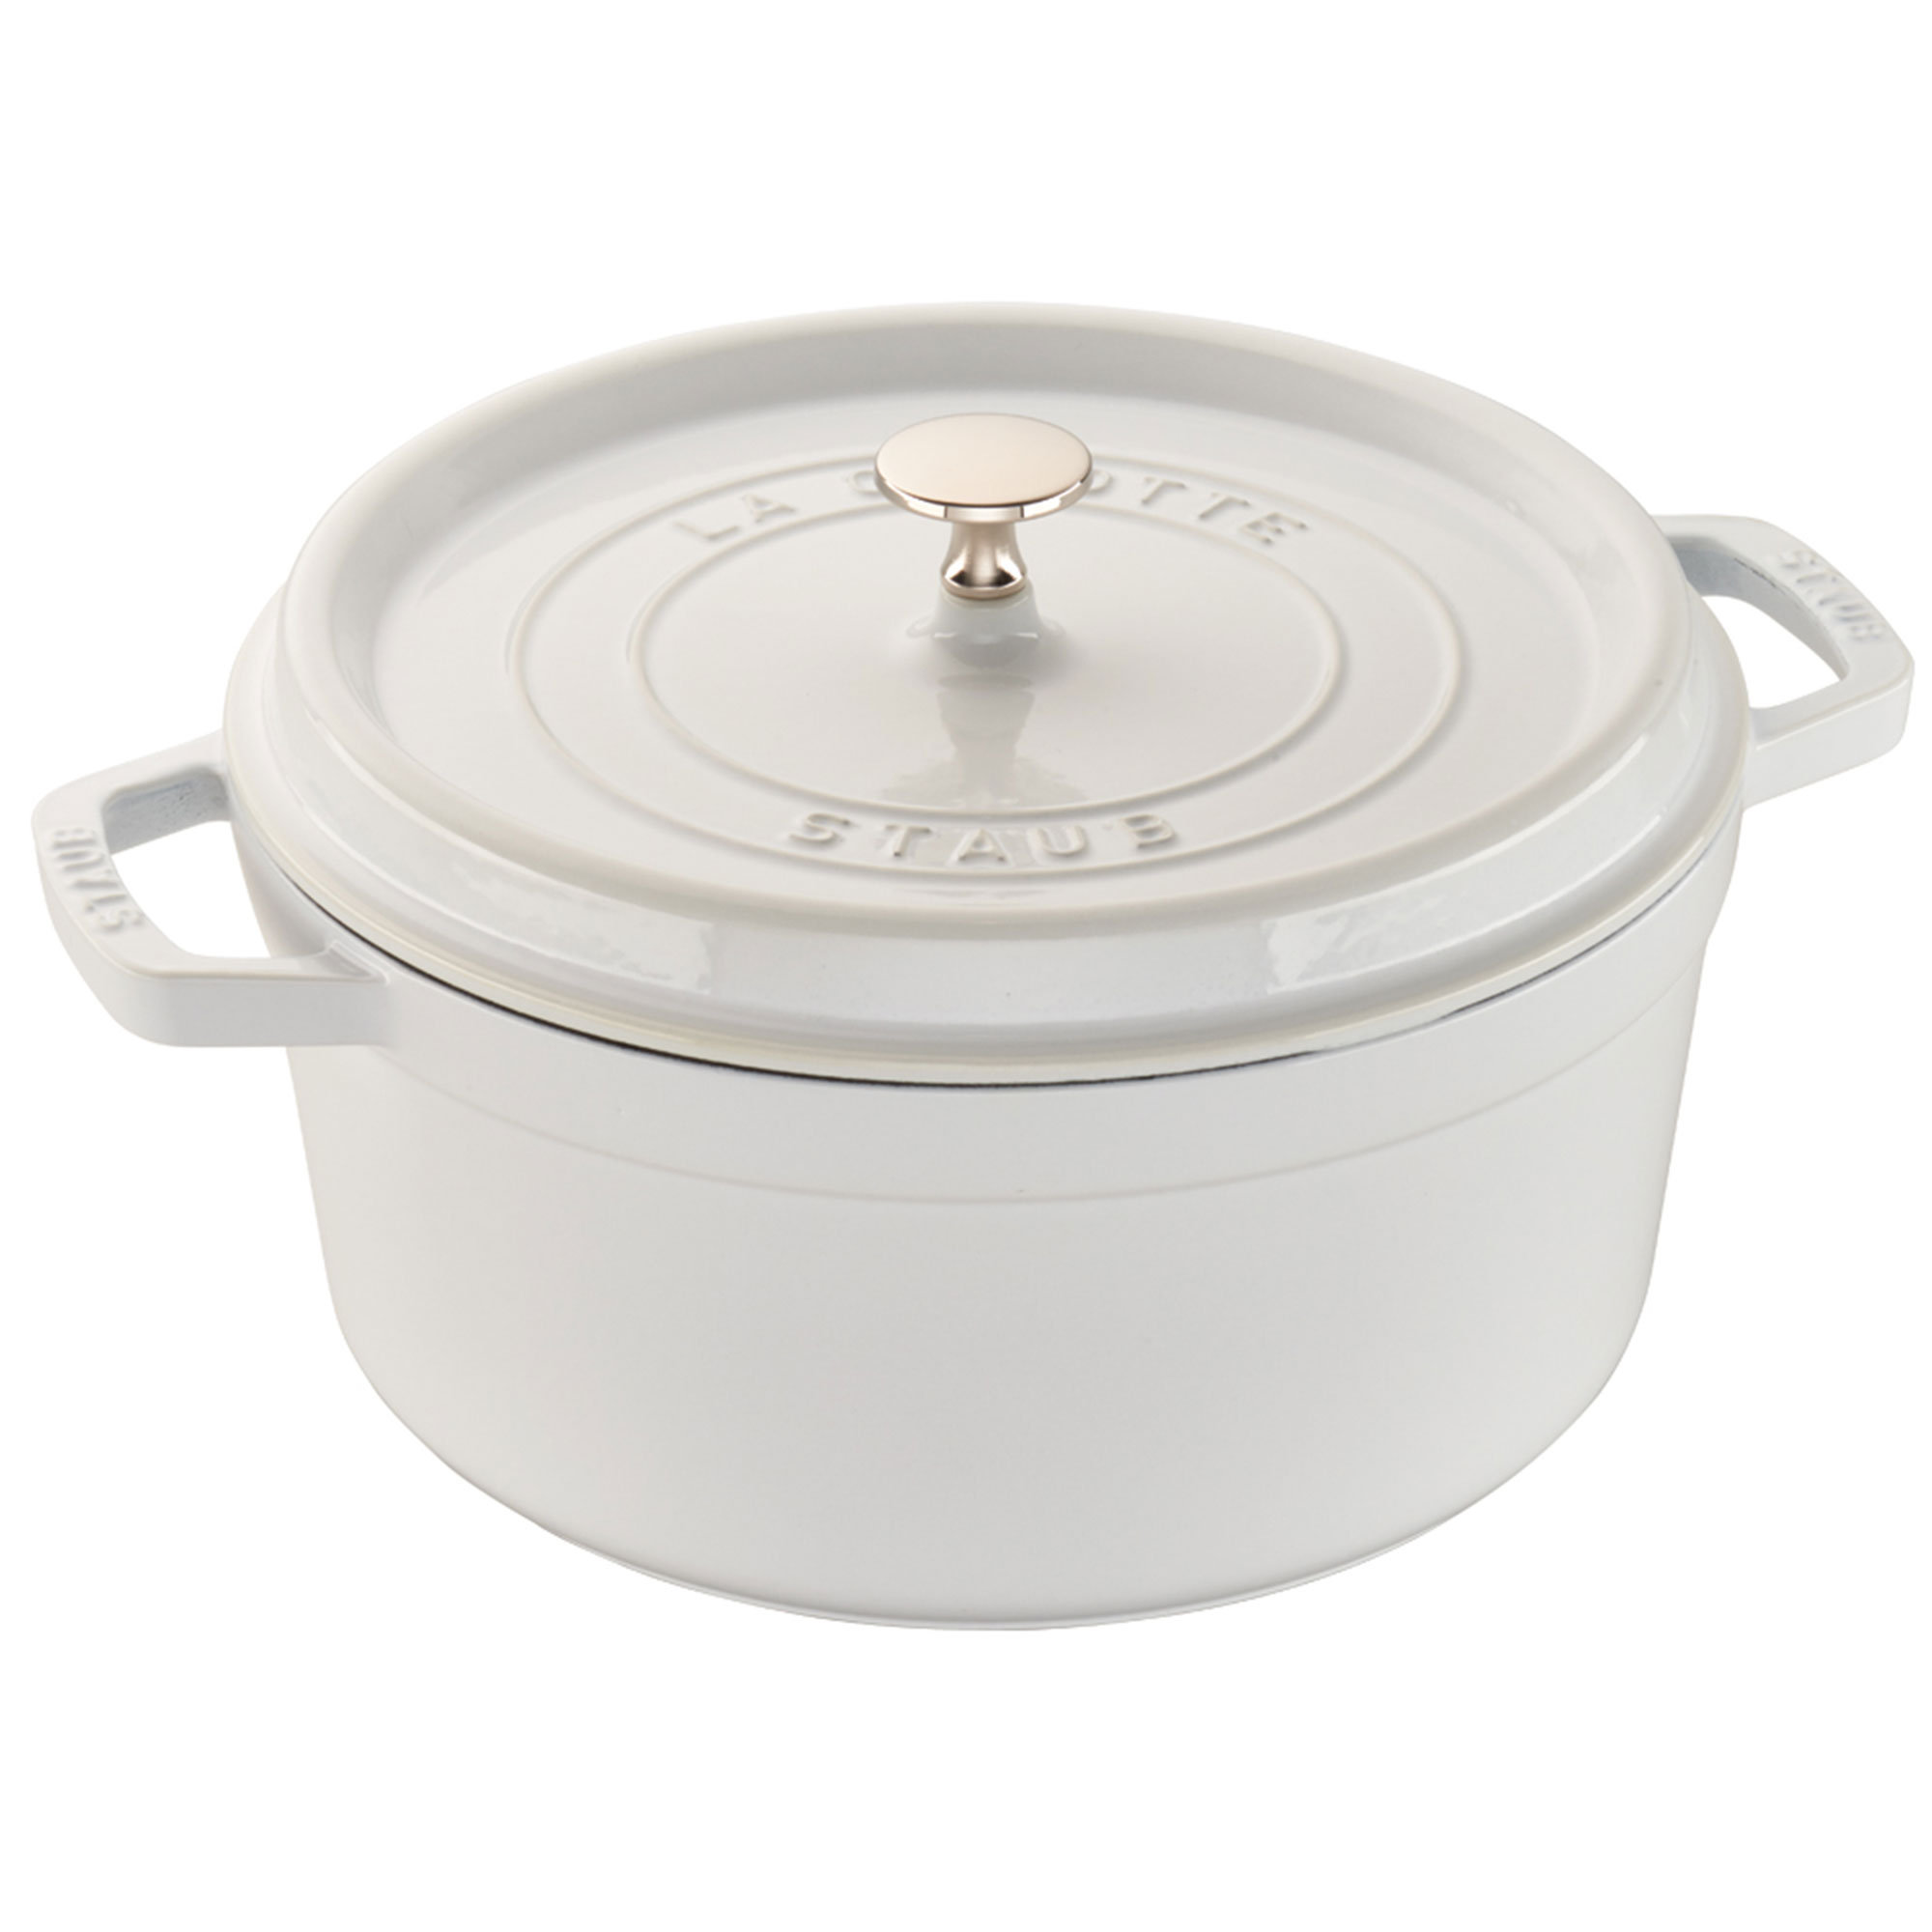 Staub 4QT Round Dutch Oven - Turquoise - Limited Edition